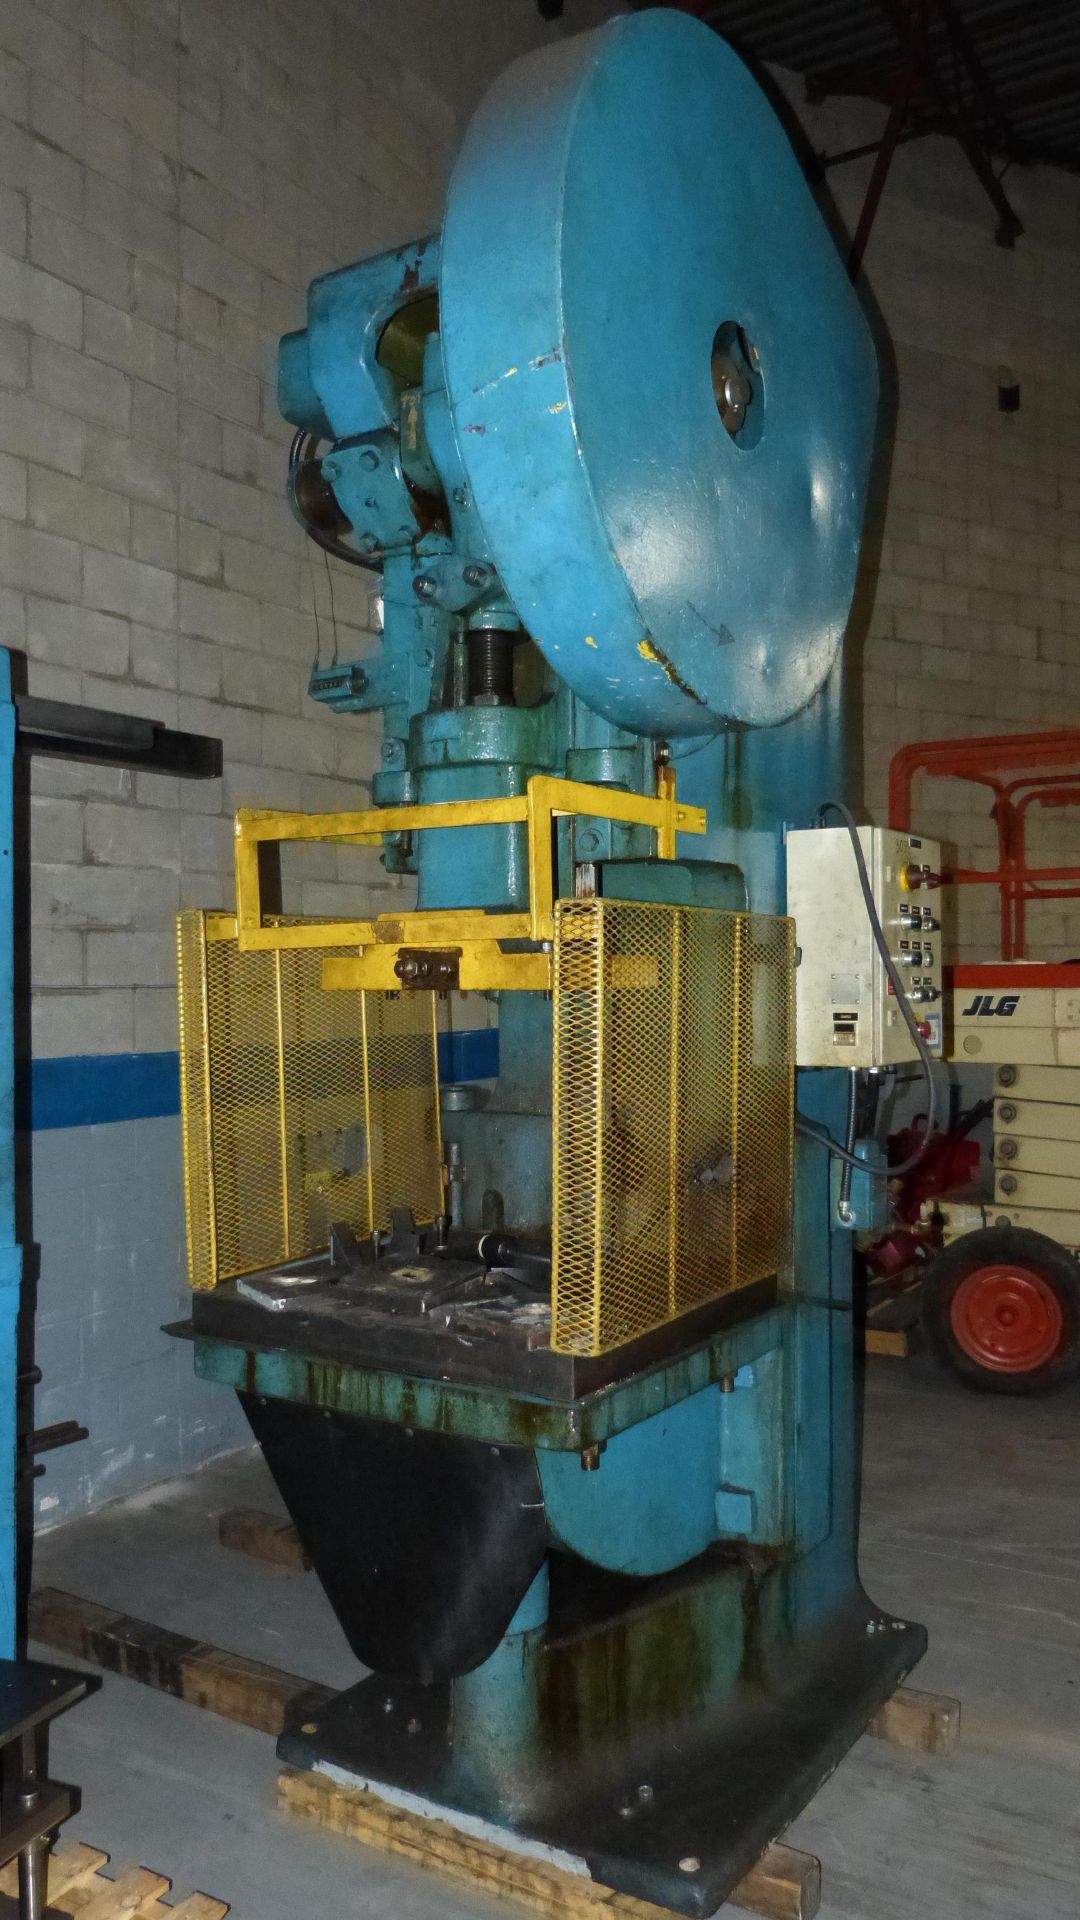 Minster 56 Ton Punch Press, Air Clutch 8" Stroke, 20" x 15" Bolster, Adjustable Bed Height - Image 2 of 6